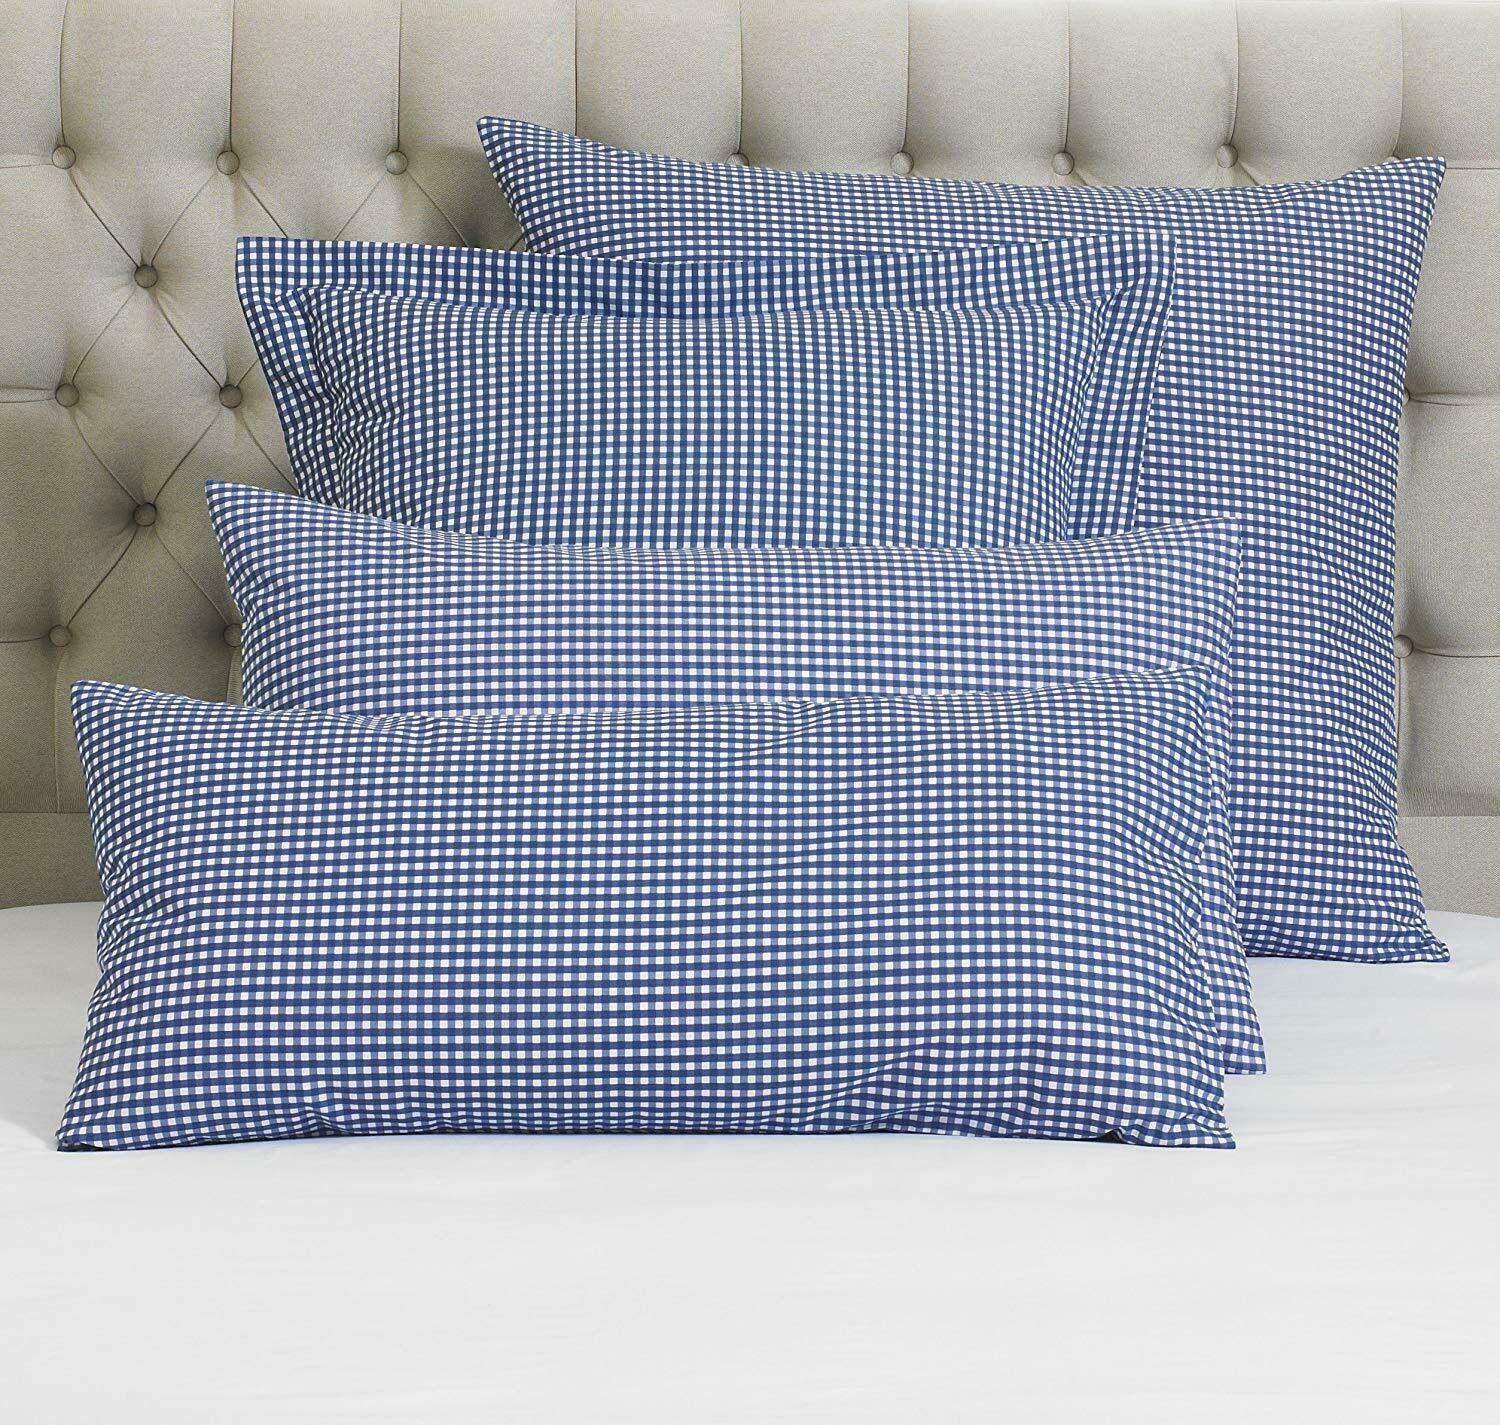 Luxury Gingham Check Duvet Cover Set With Pillowcases